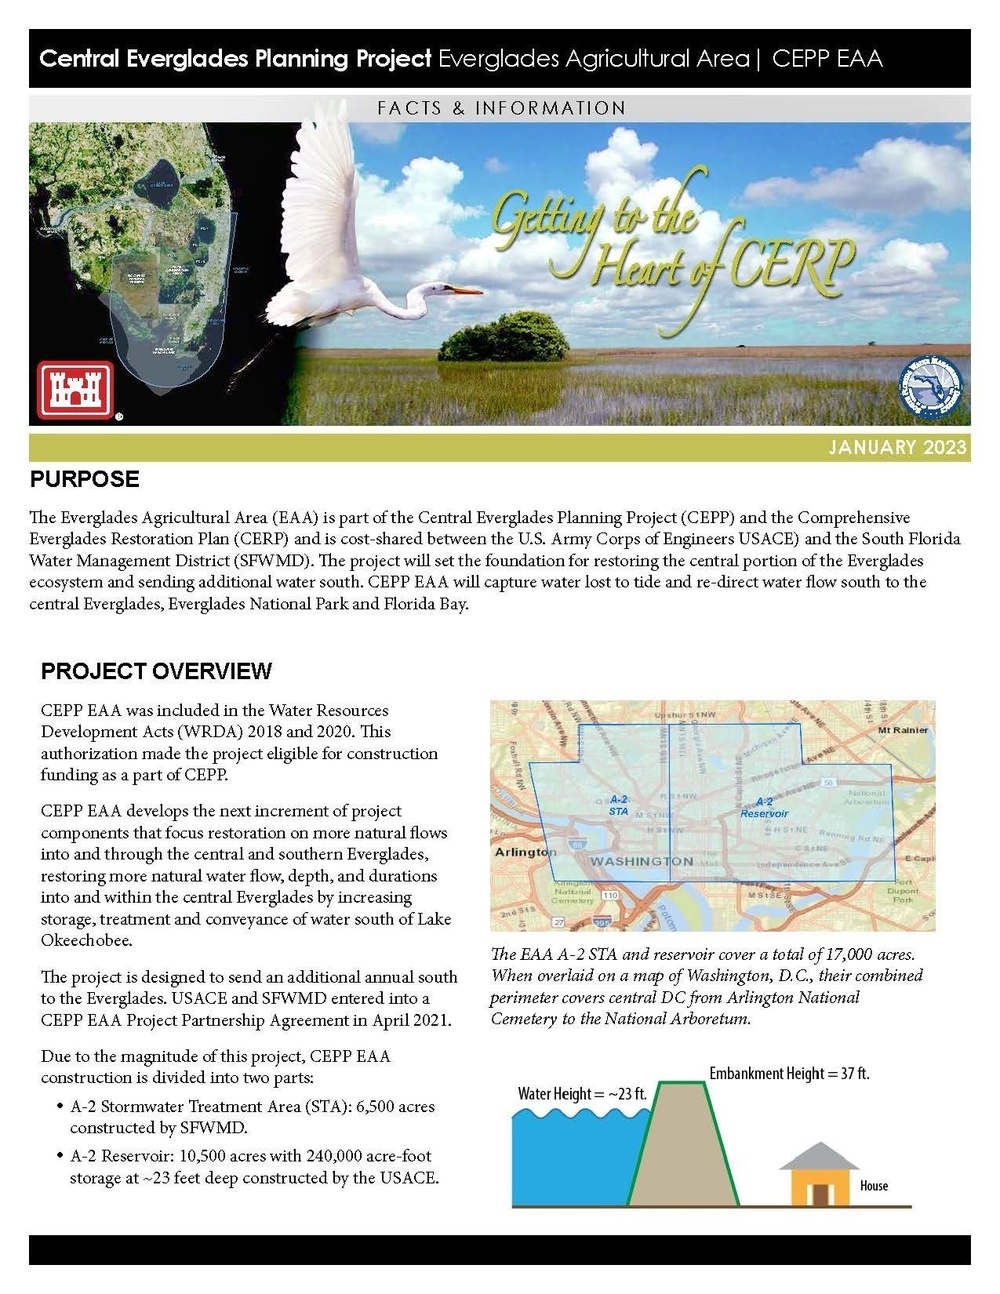 Central Everglades Planning Project (CEPP) EAA